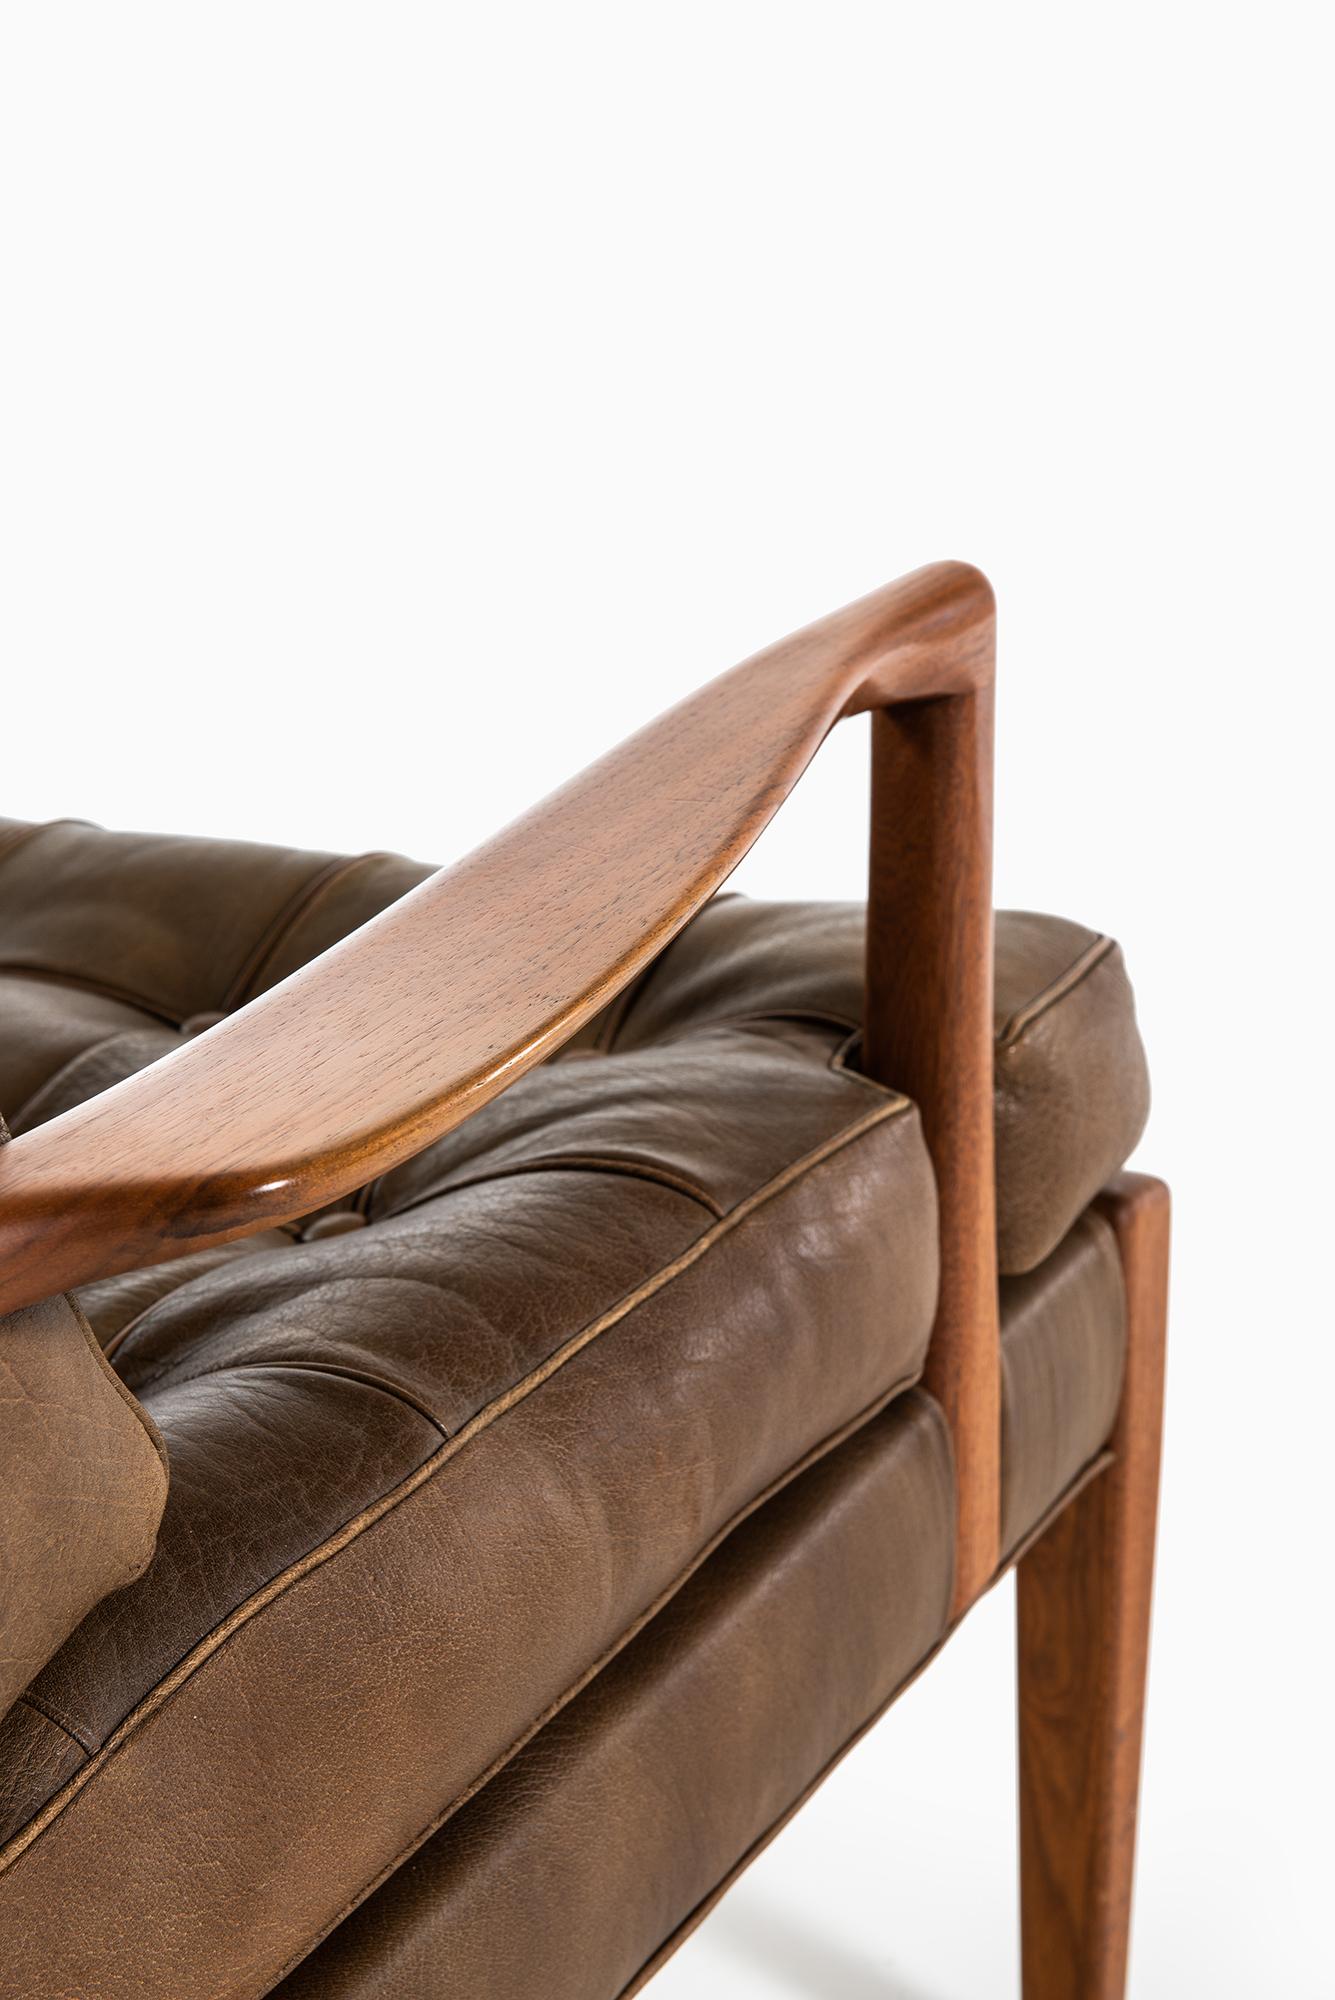 Leather Arne Norell Easy Chairs Model Löven by Arne Norell AB in Sweden